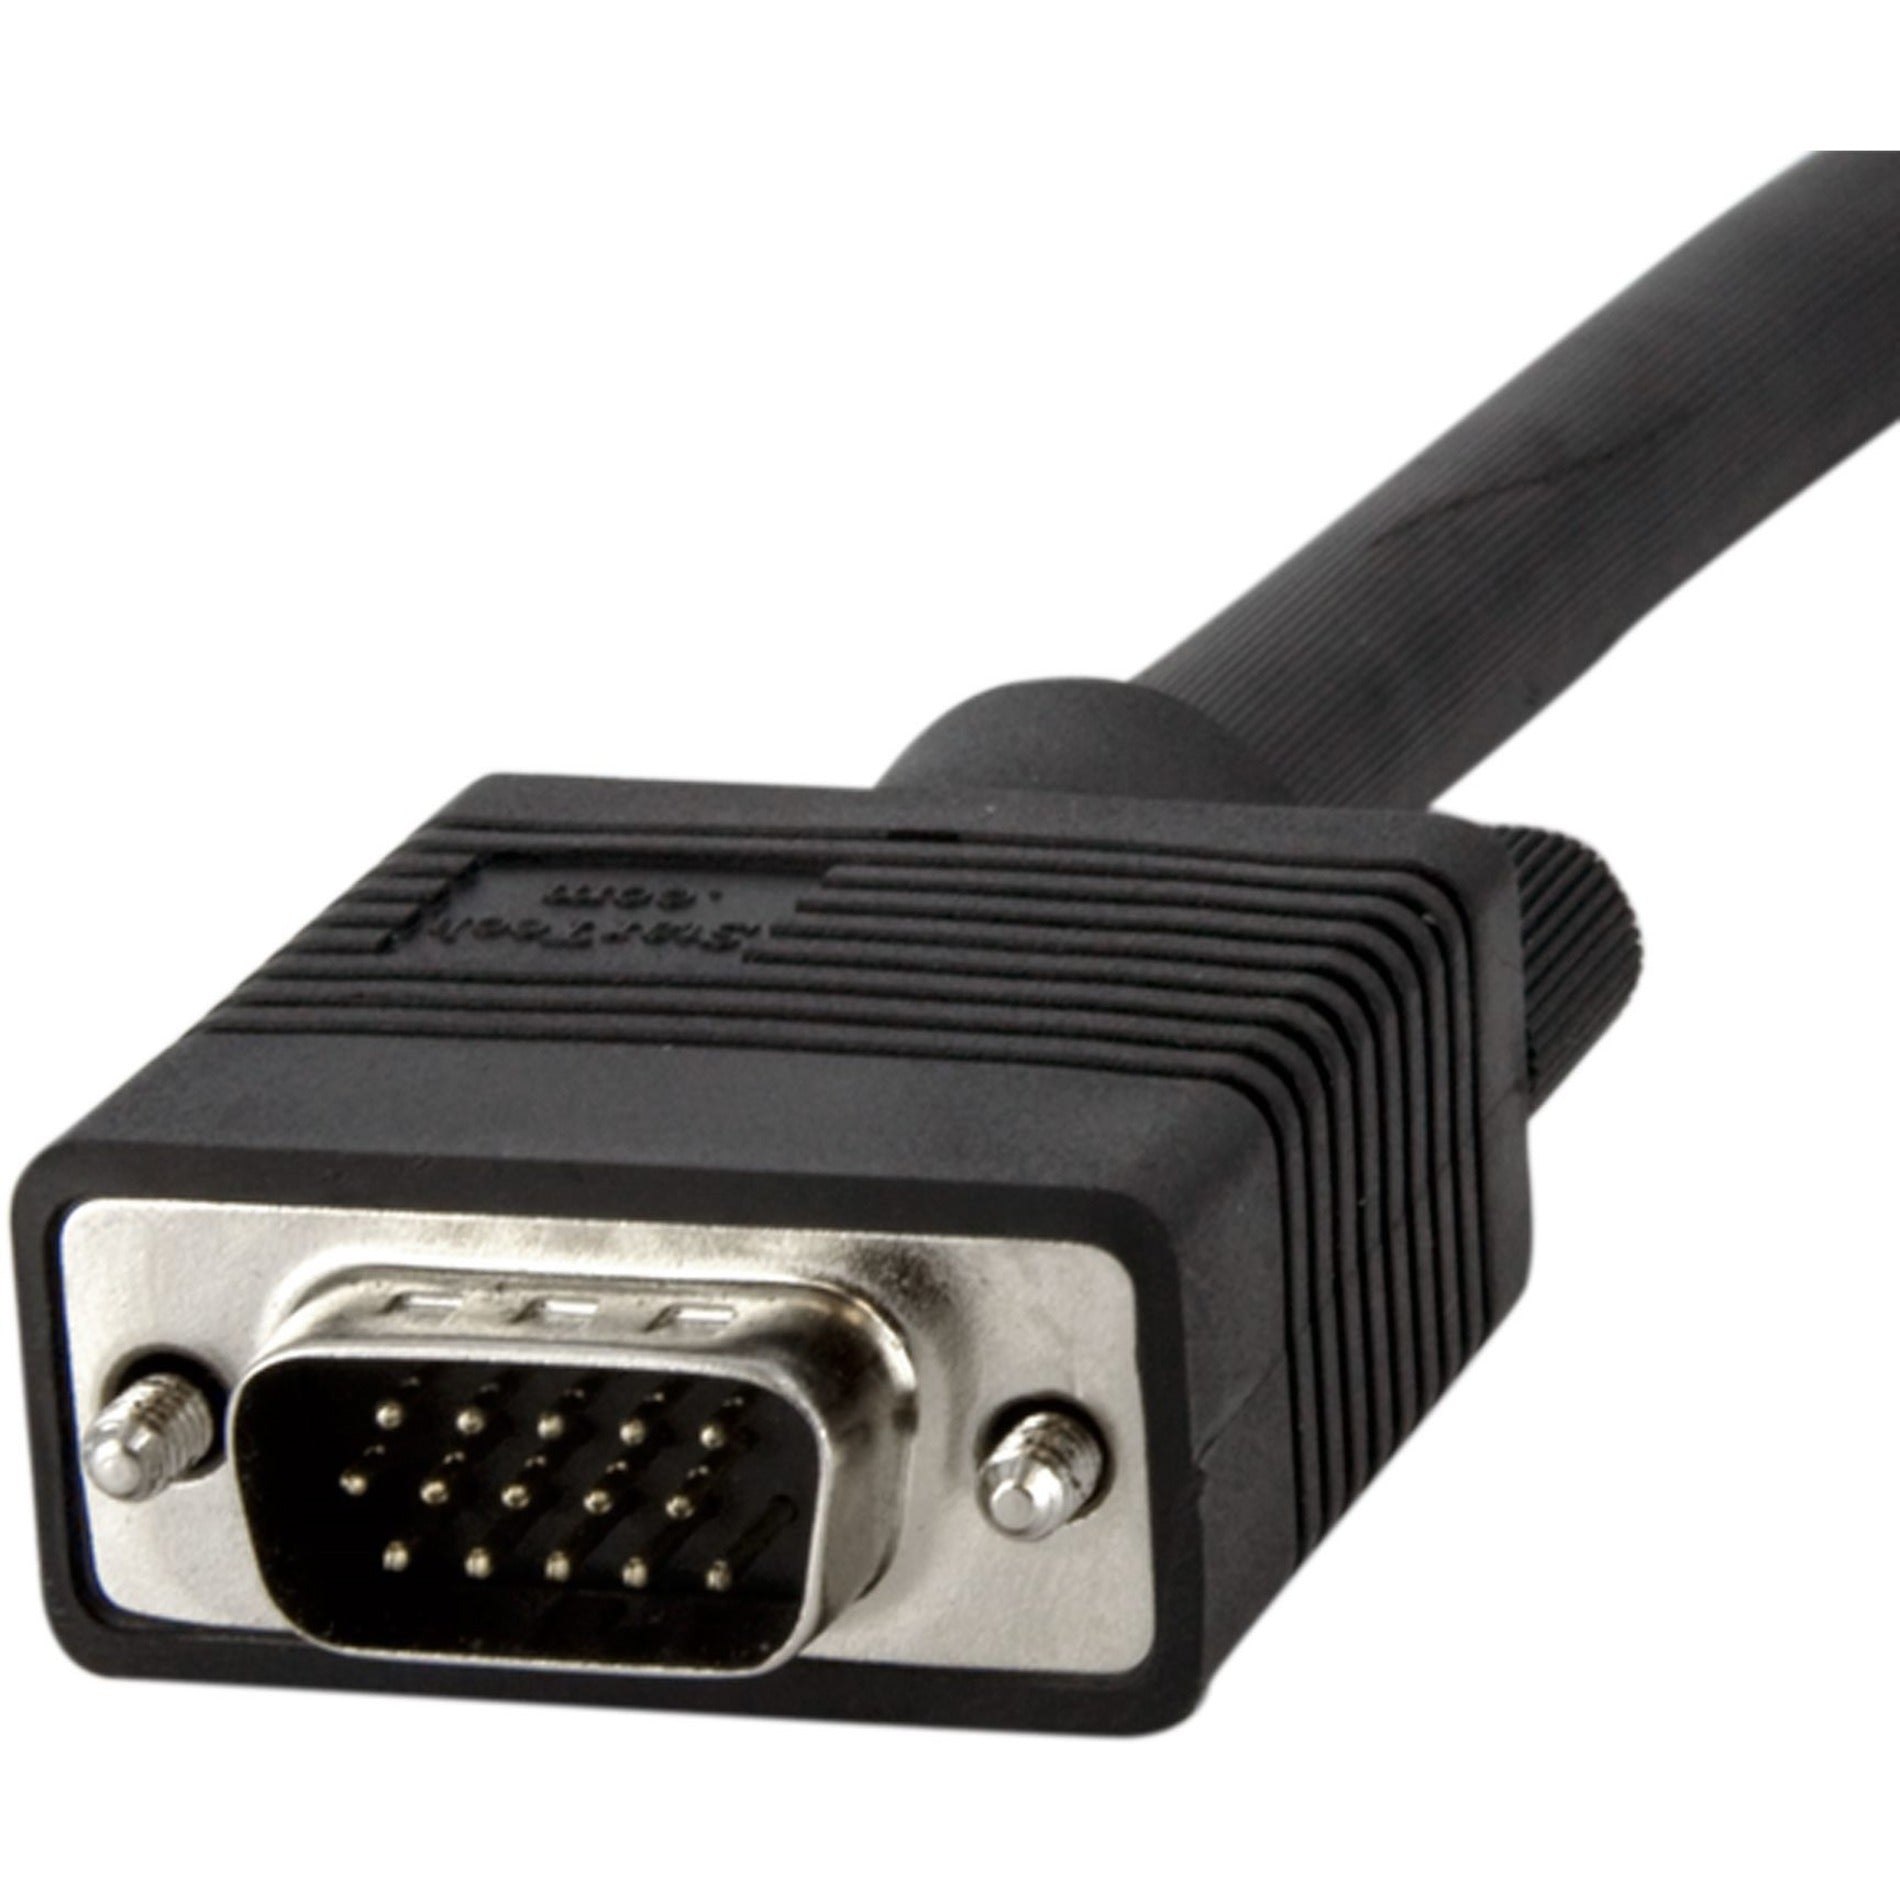 StarTech.com MXT101MMHD6 6 ft 90 Degree Down Angled VGA Monitor Cable, Molded, EMI Protection